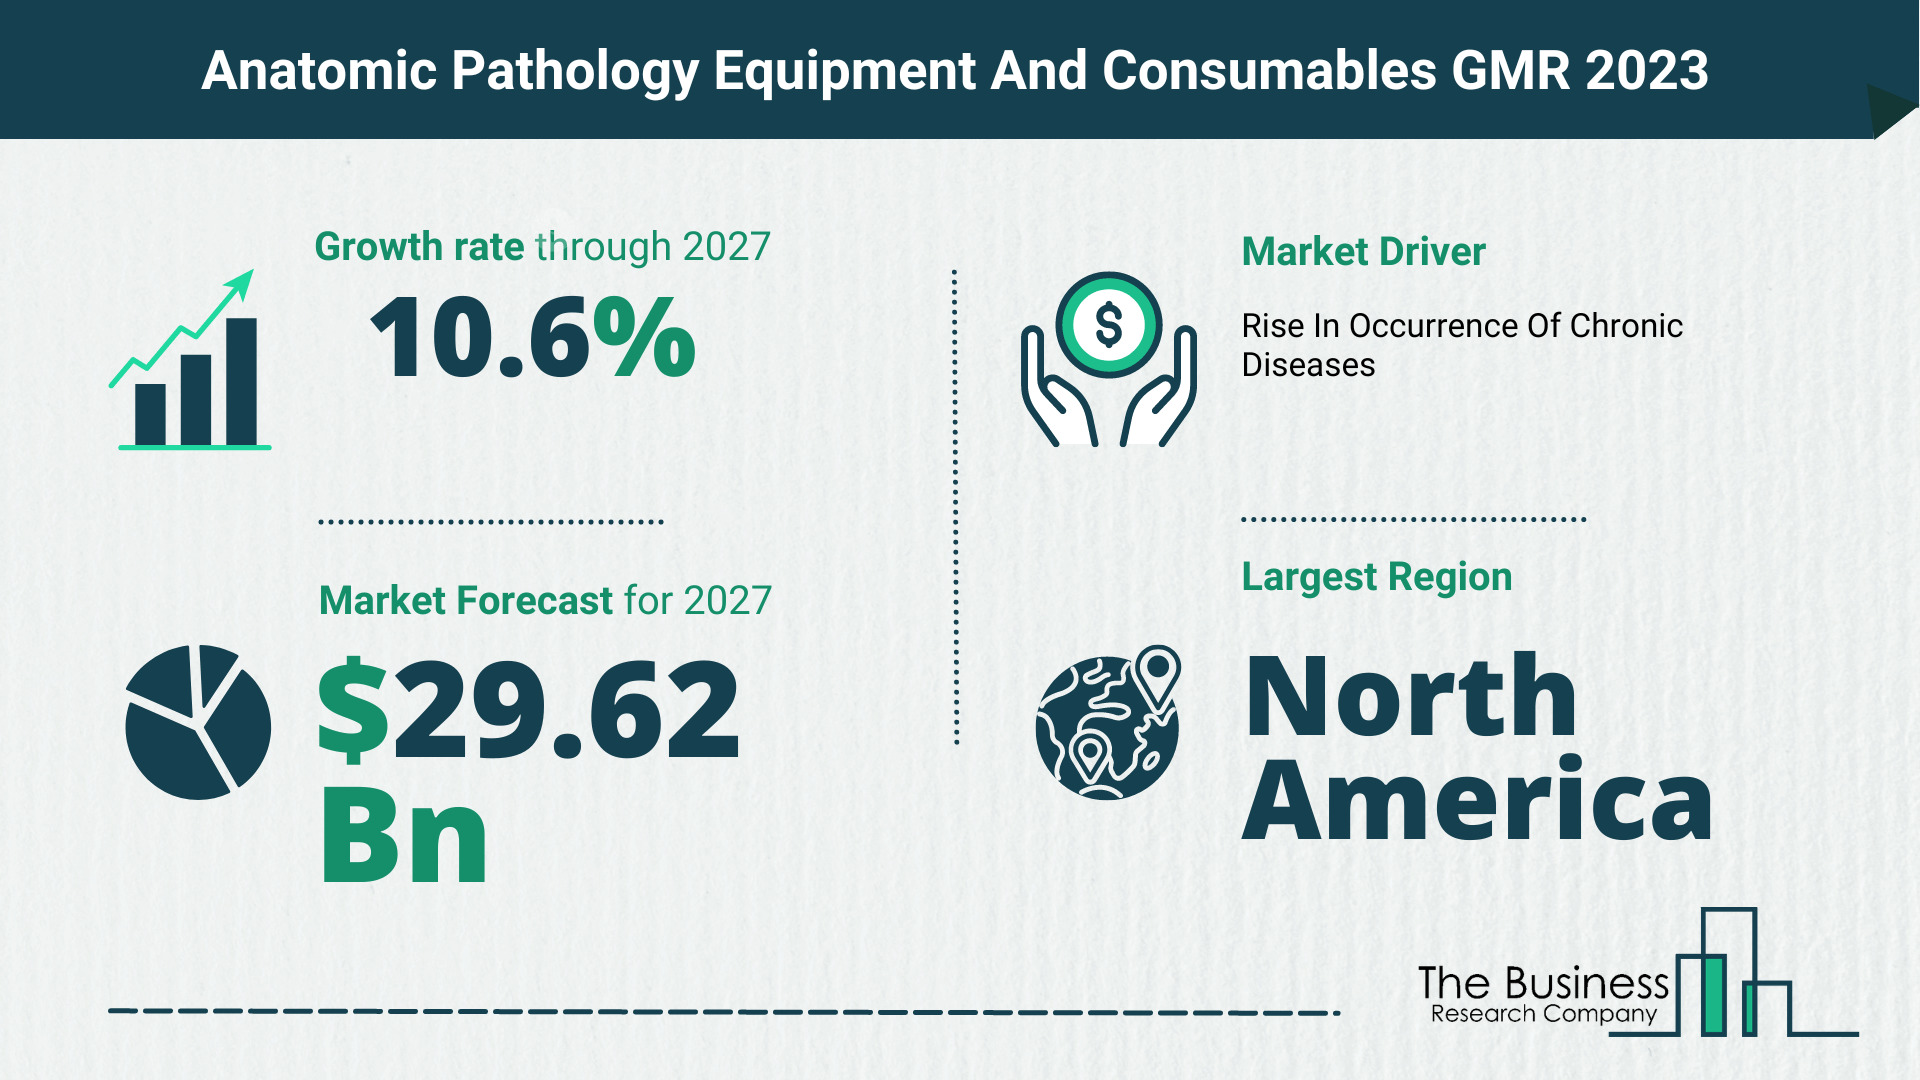 Anatomic Pathology Equipment And Consumables Market Forecast 2023-2027 By The Business Research Company